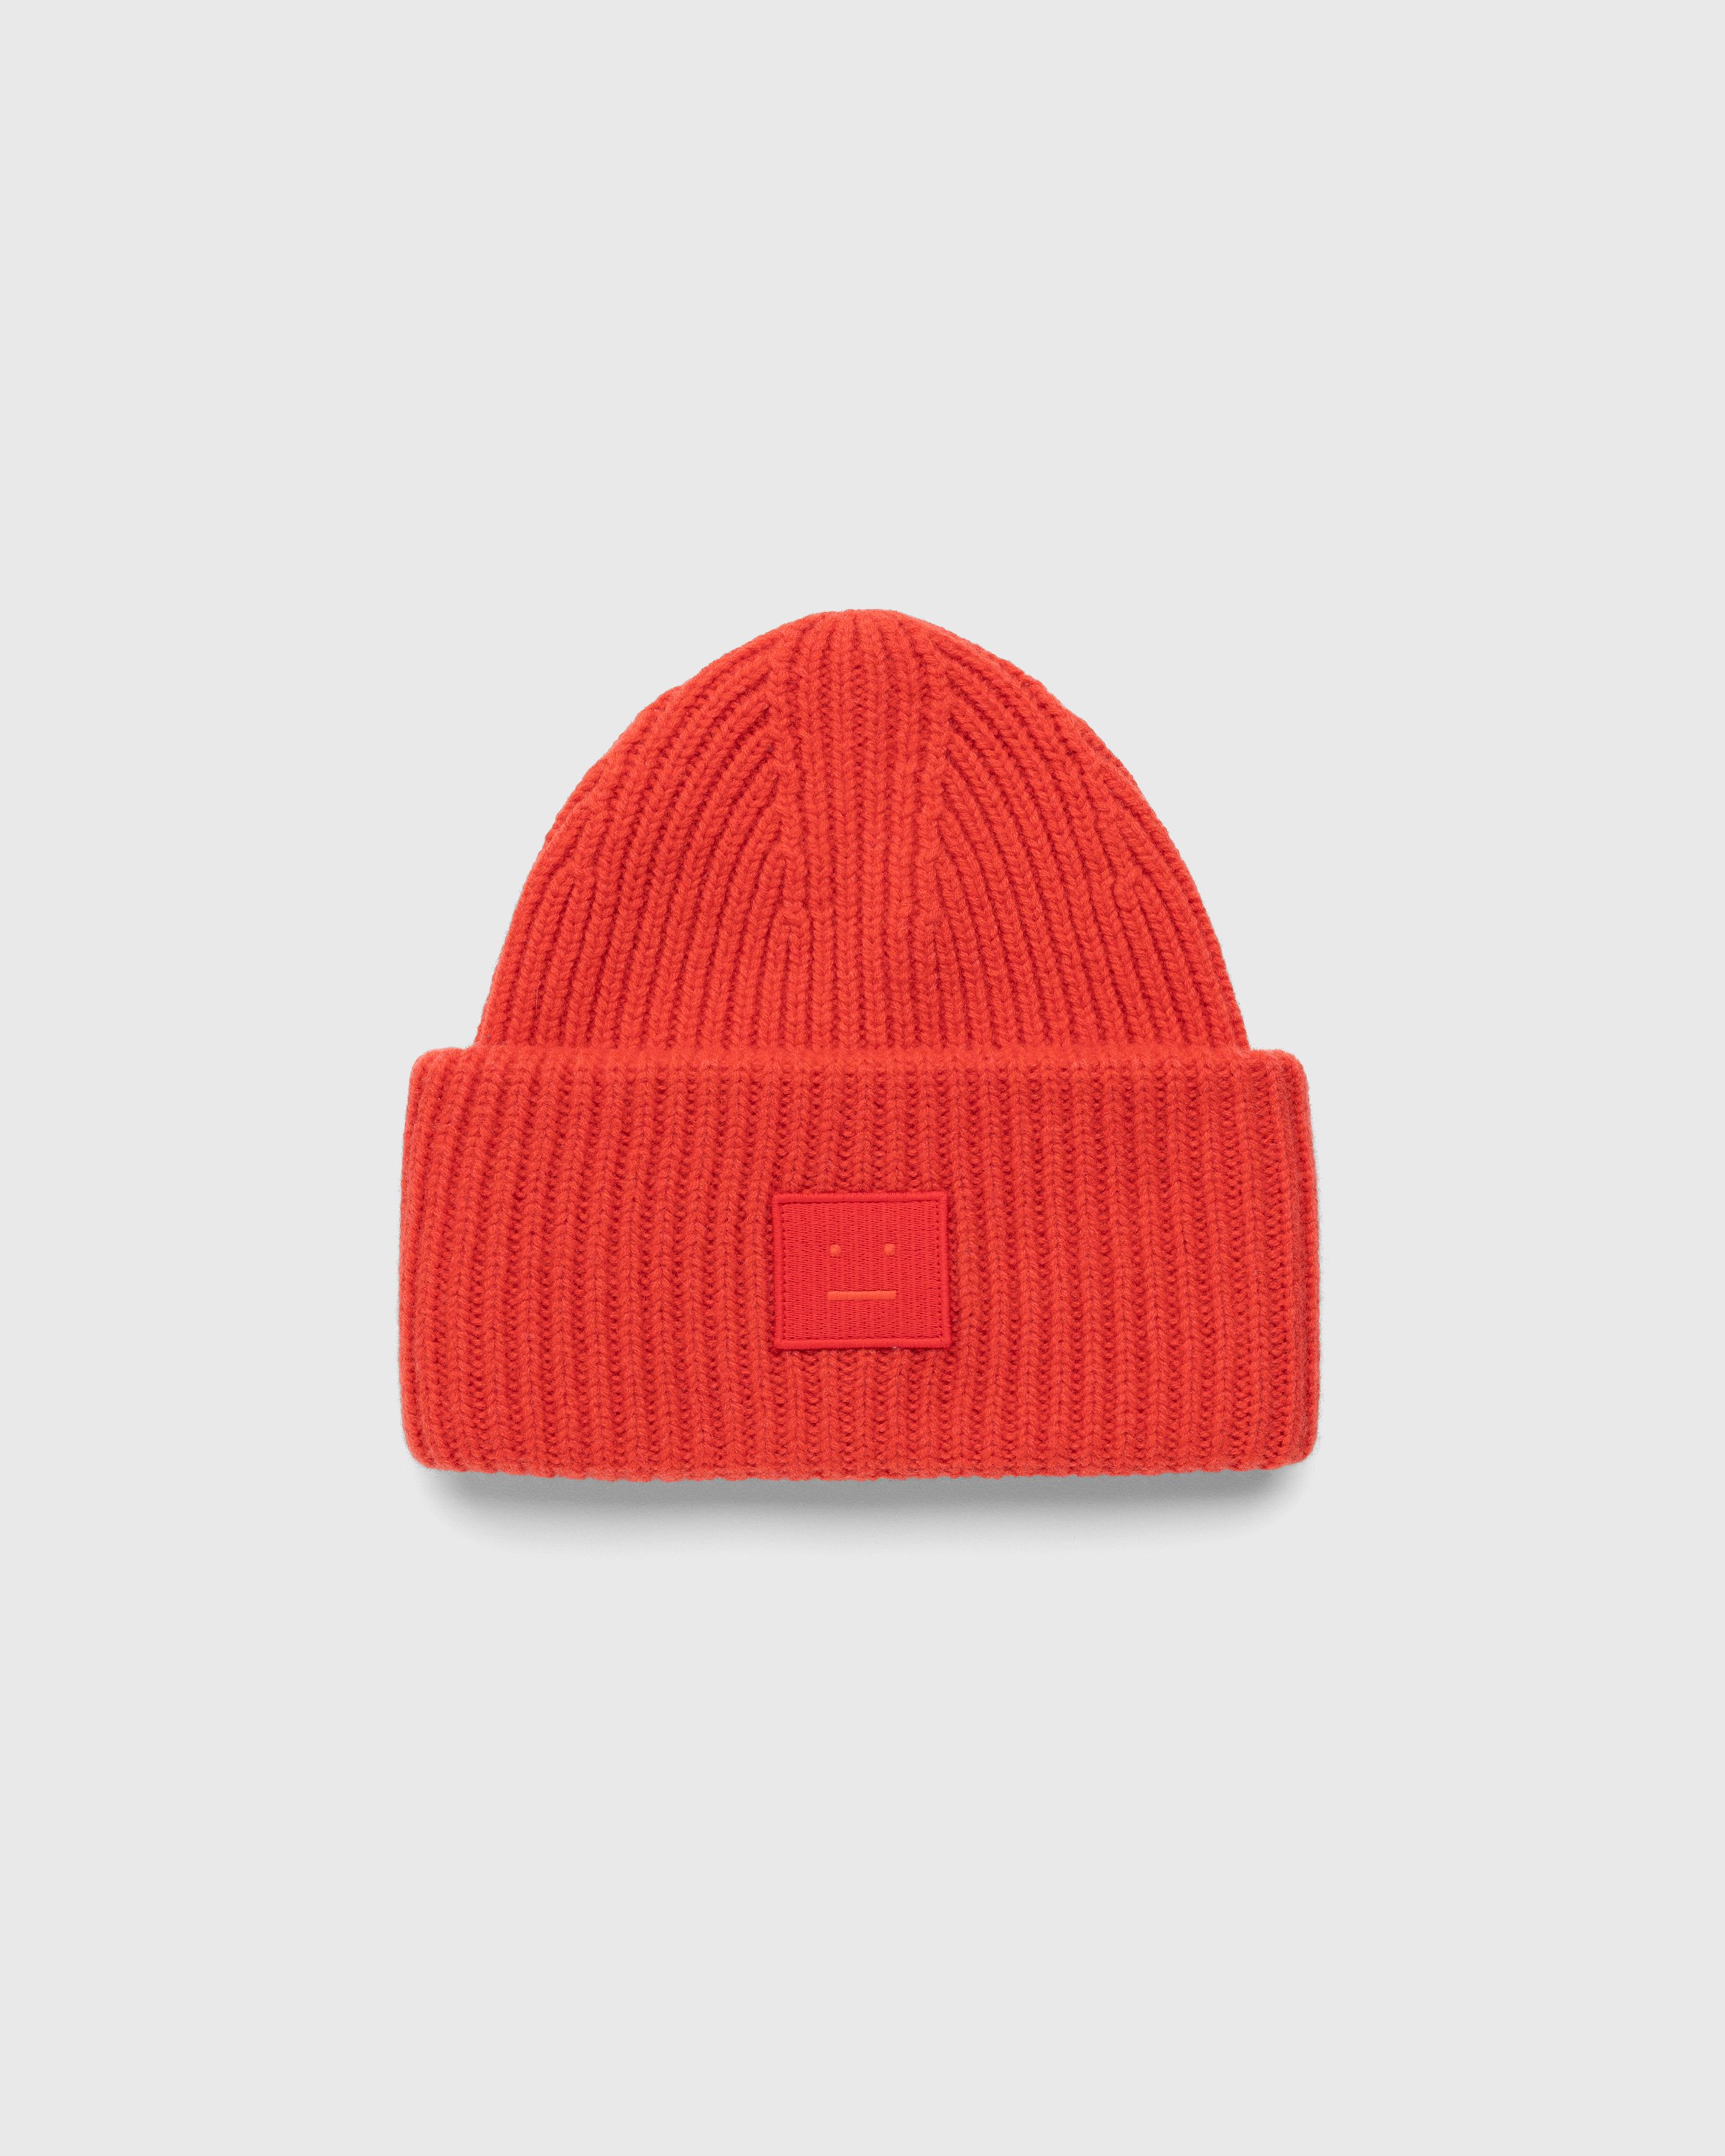 Acne Studios - Large Face Logo Beanie Red - Accessories - Red - Image 1